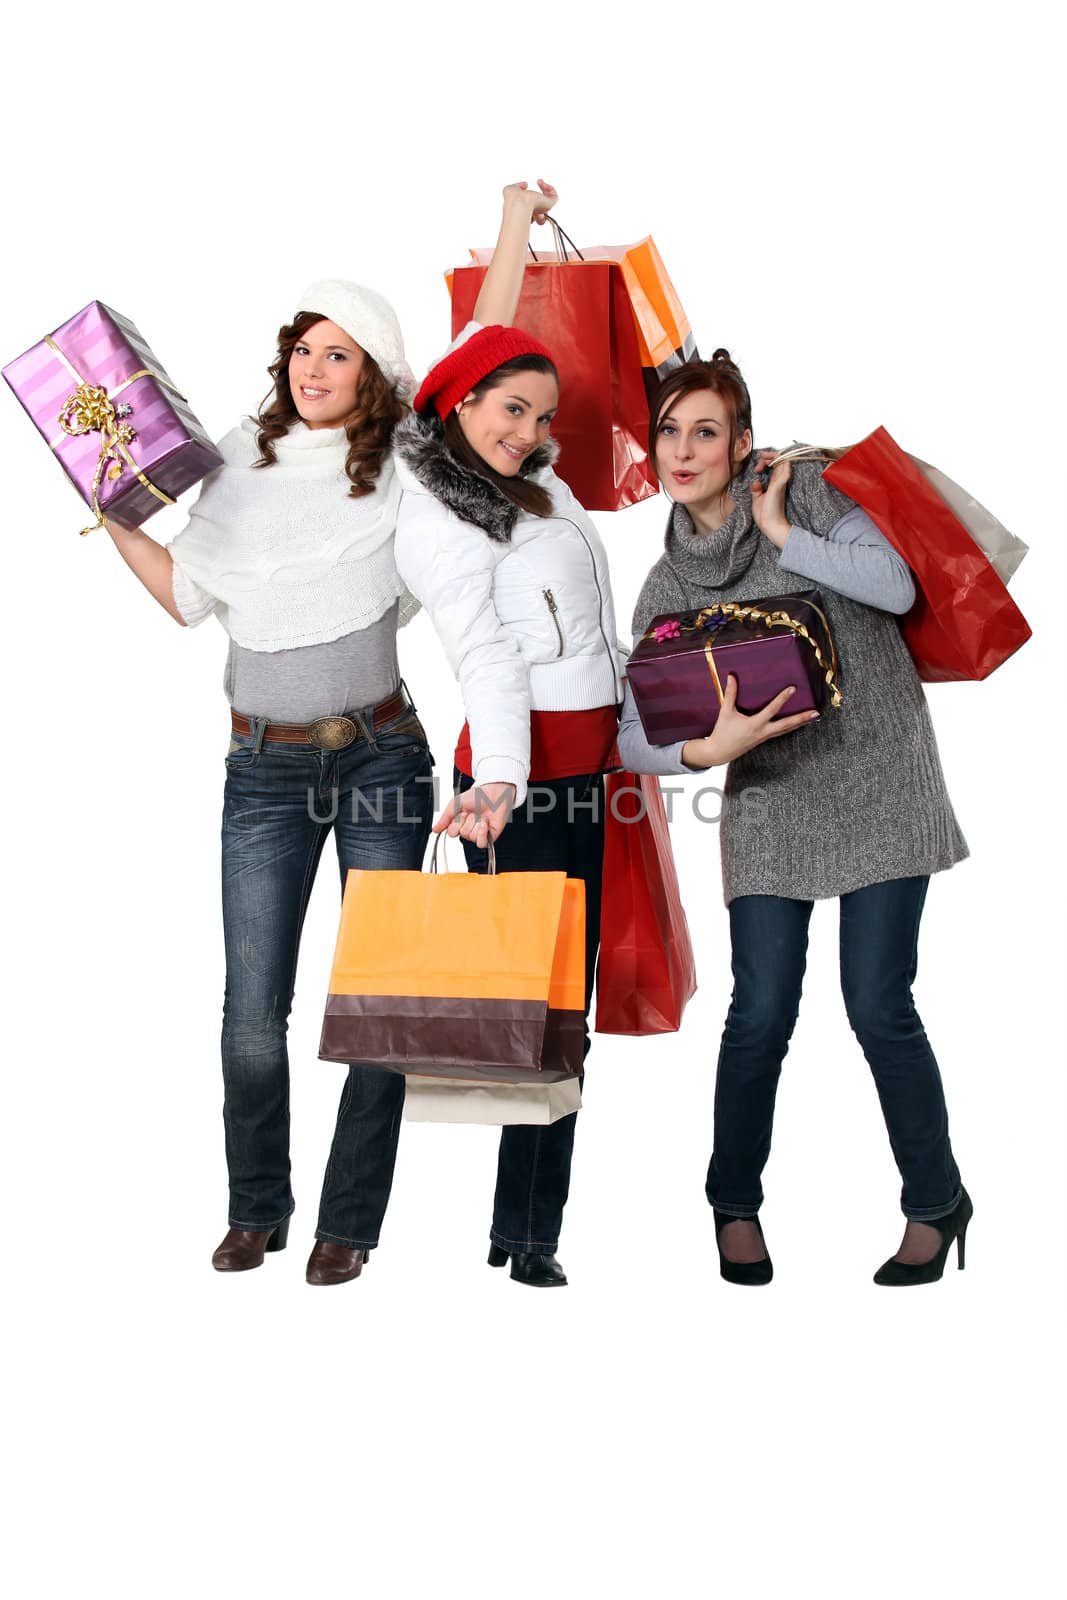 Women carrying bags and gifts by phovoir